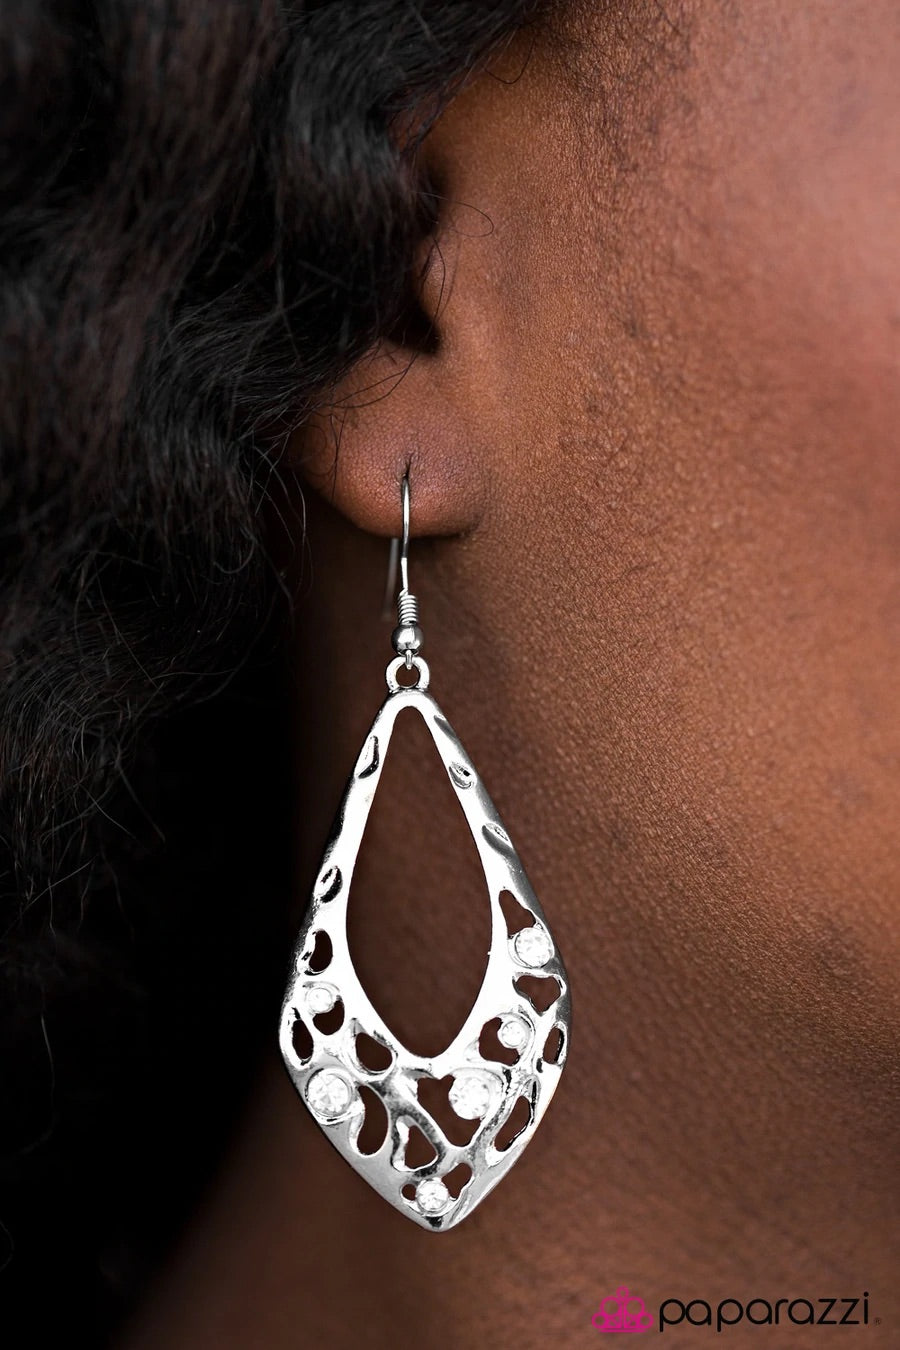 Don’t Flatter Yourself - White Earrings - Paparazzi Accessories